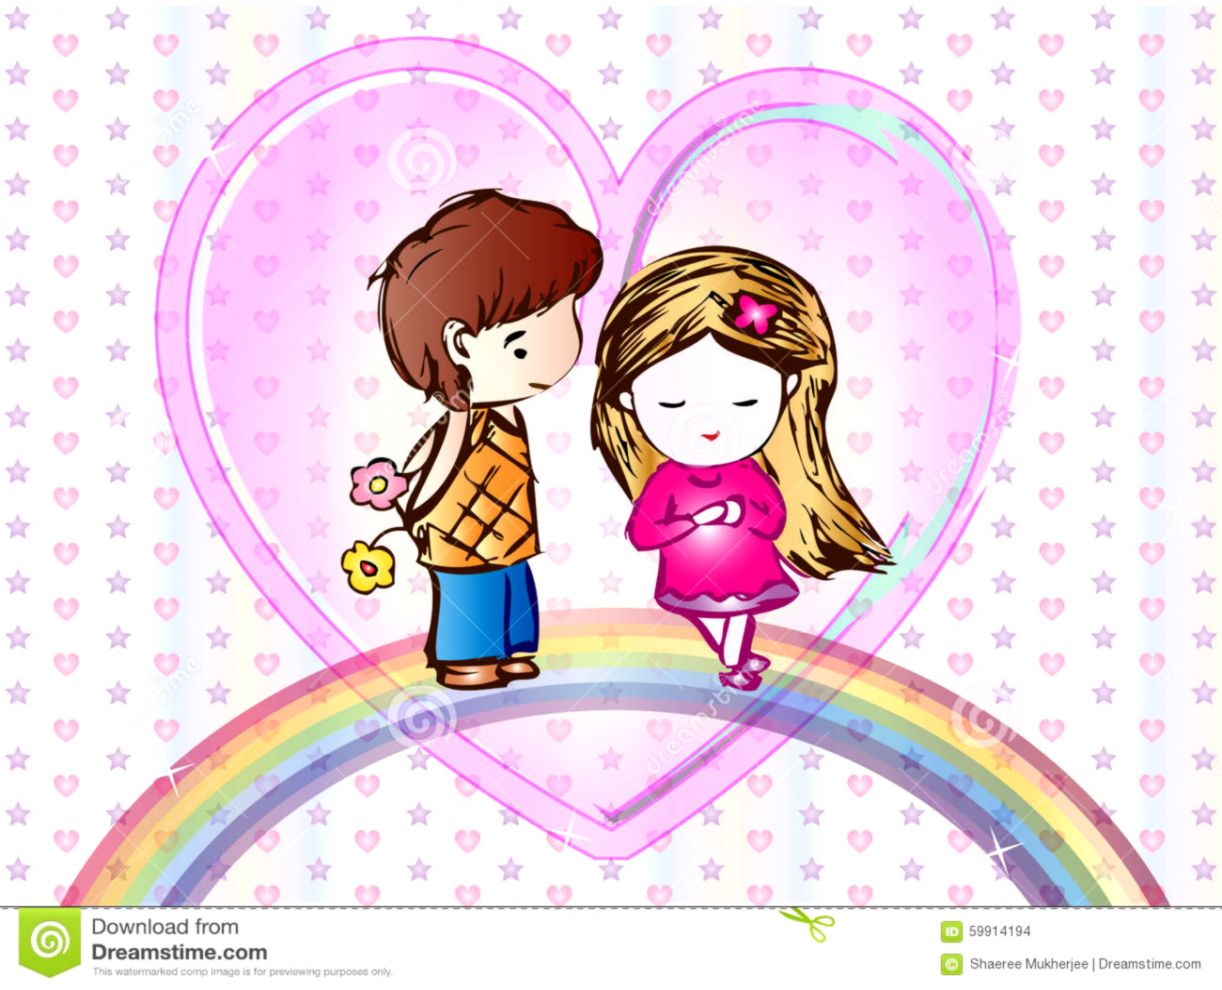 Images Of Love Pictures Cartoons Cute